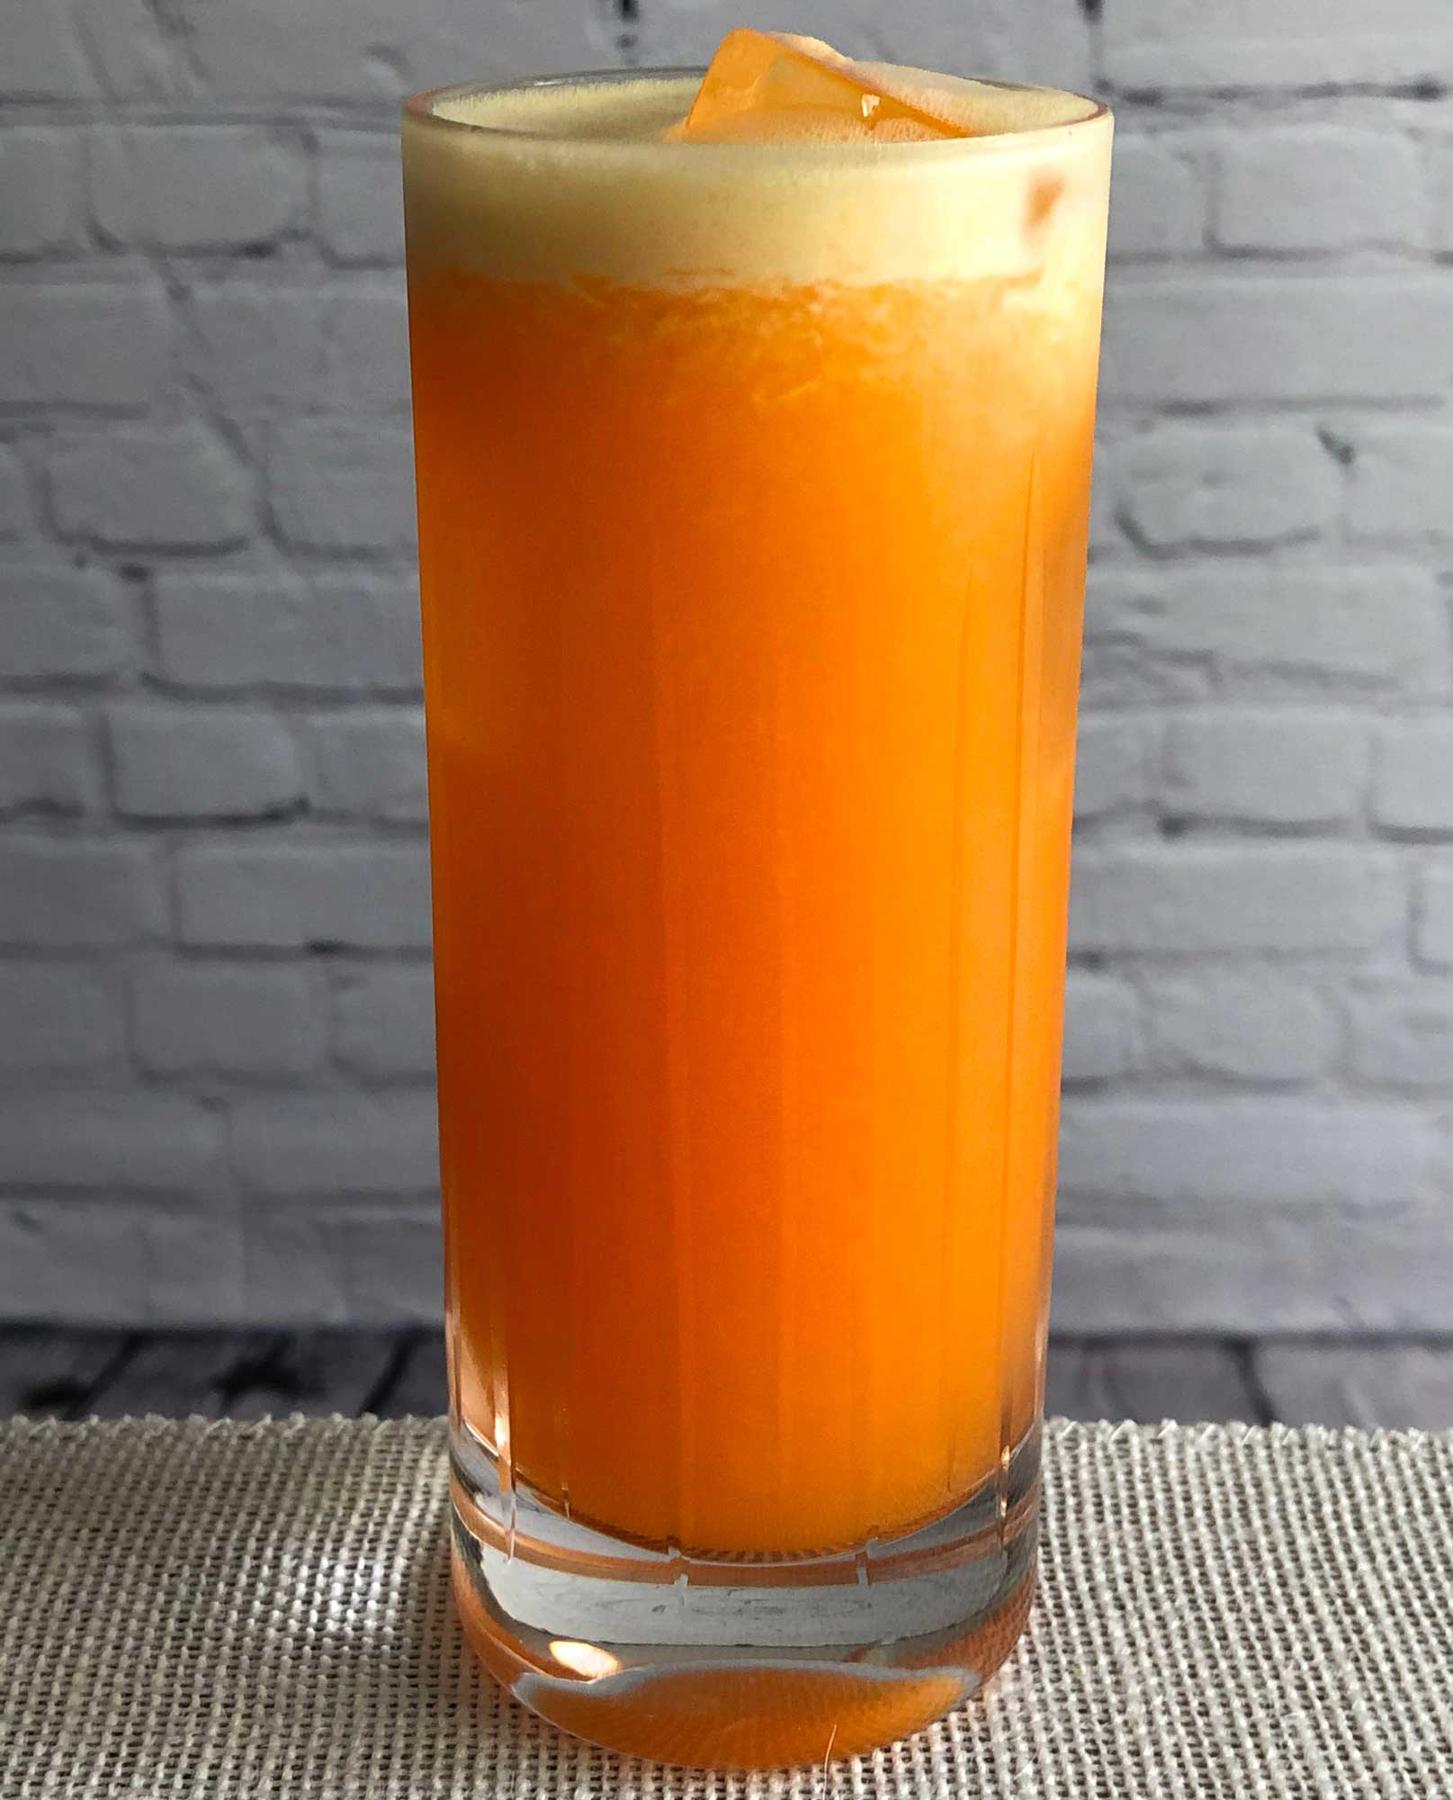 An example of the The Maddalena, the mixed drink (drink) featuring Aperitivo Cappelletti, orange juice, and grapefruit juice; photo by Lee Edwards